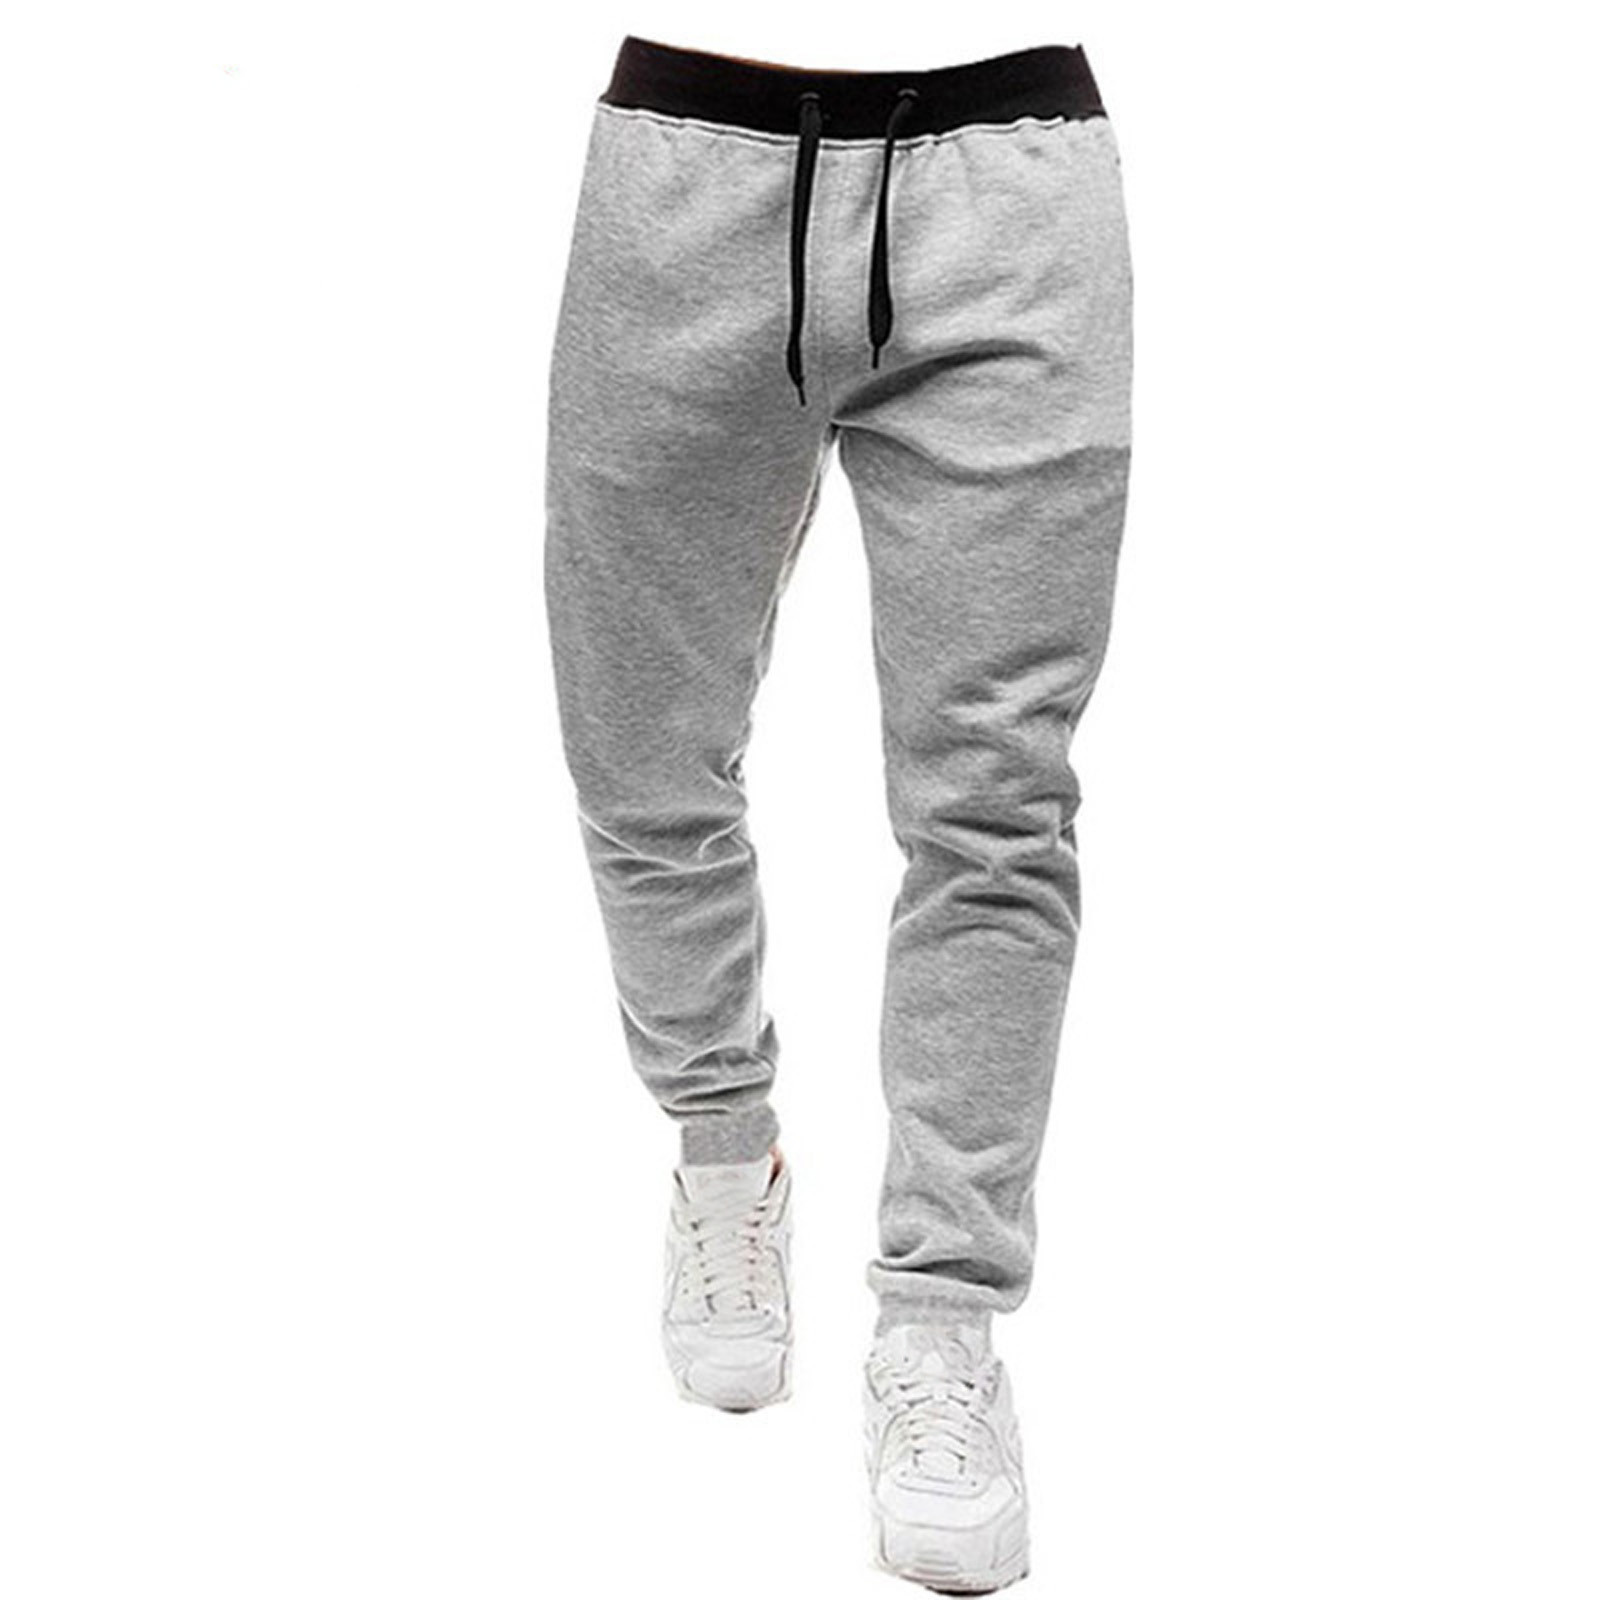 Outfmvch Sweatpants For Men Mens Jeans Men'S Youth Leisure Fashion ...